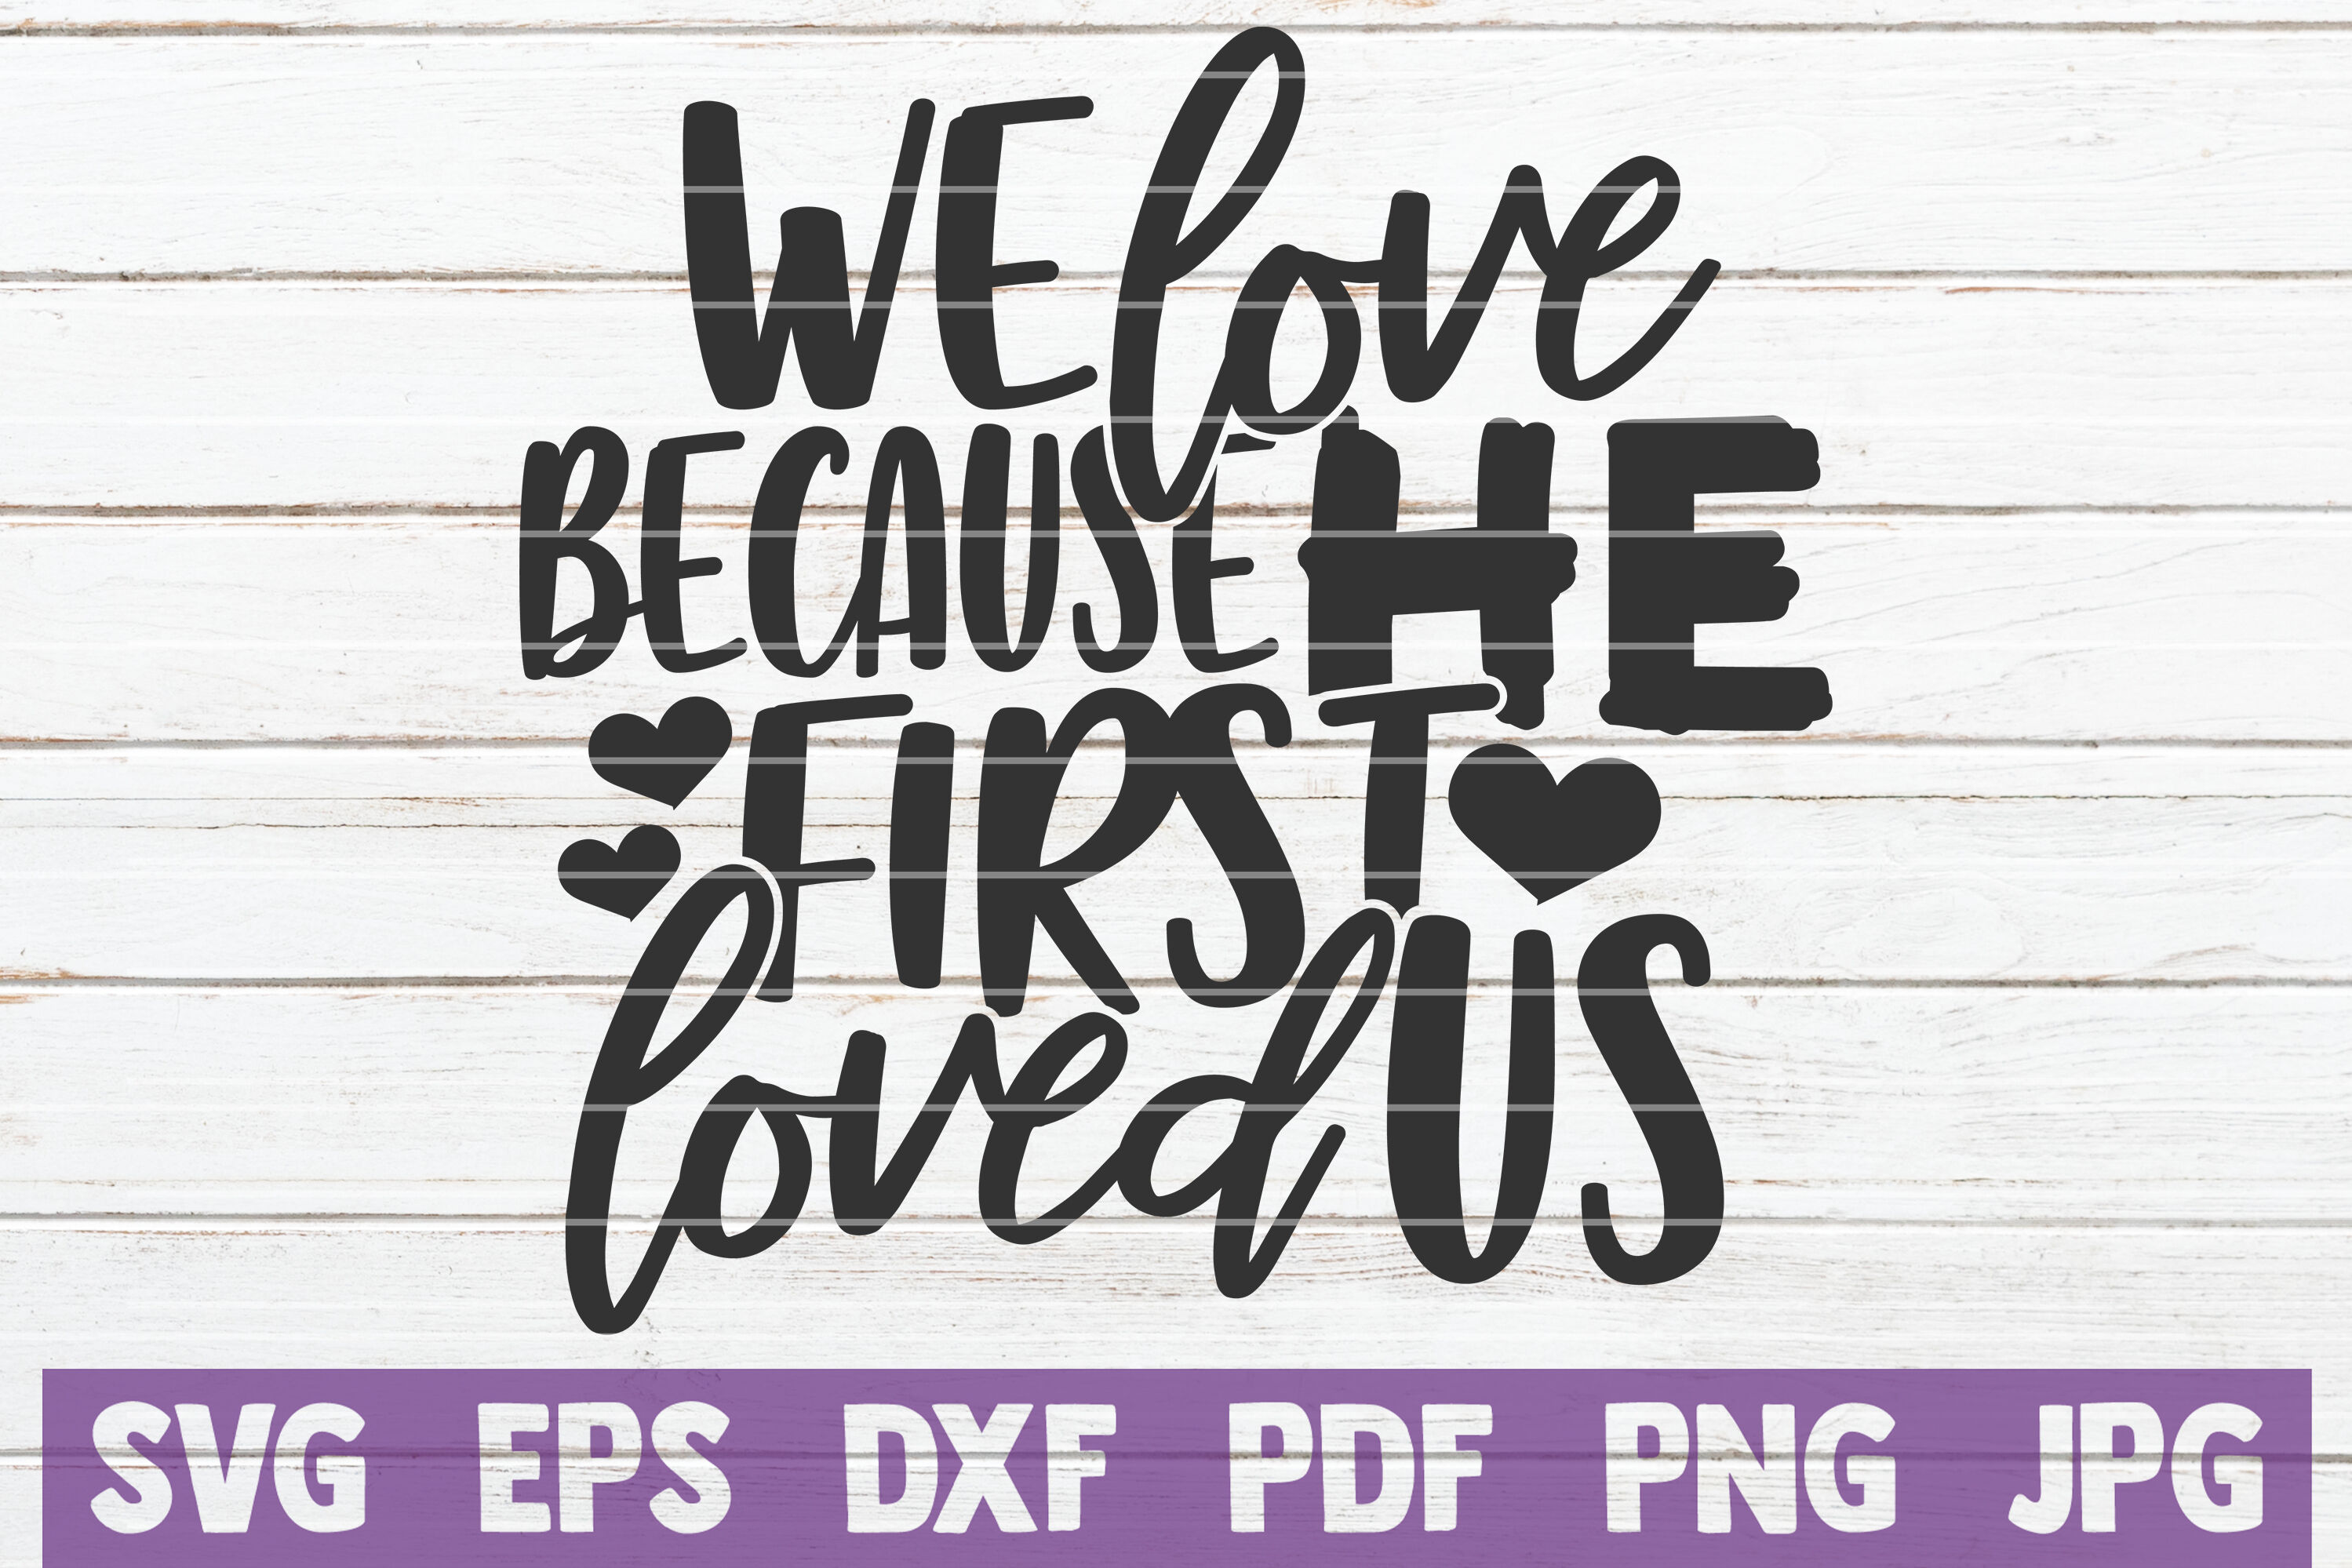 Download We Love Because He First Loved Us Svg Cut File By Mintymarshmallows Thehungryjpeg Com